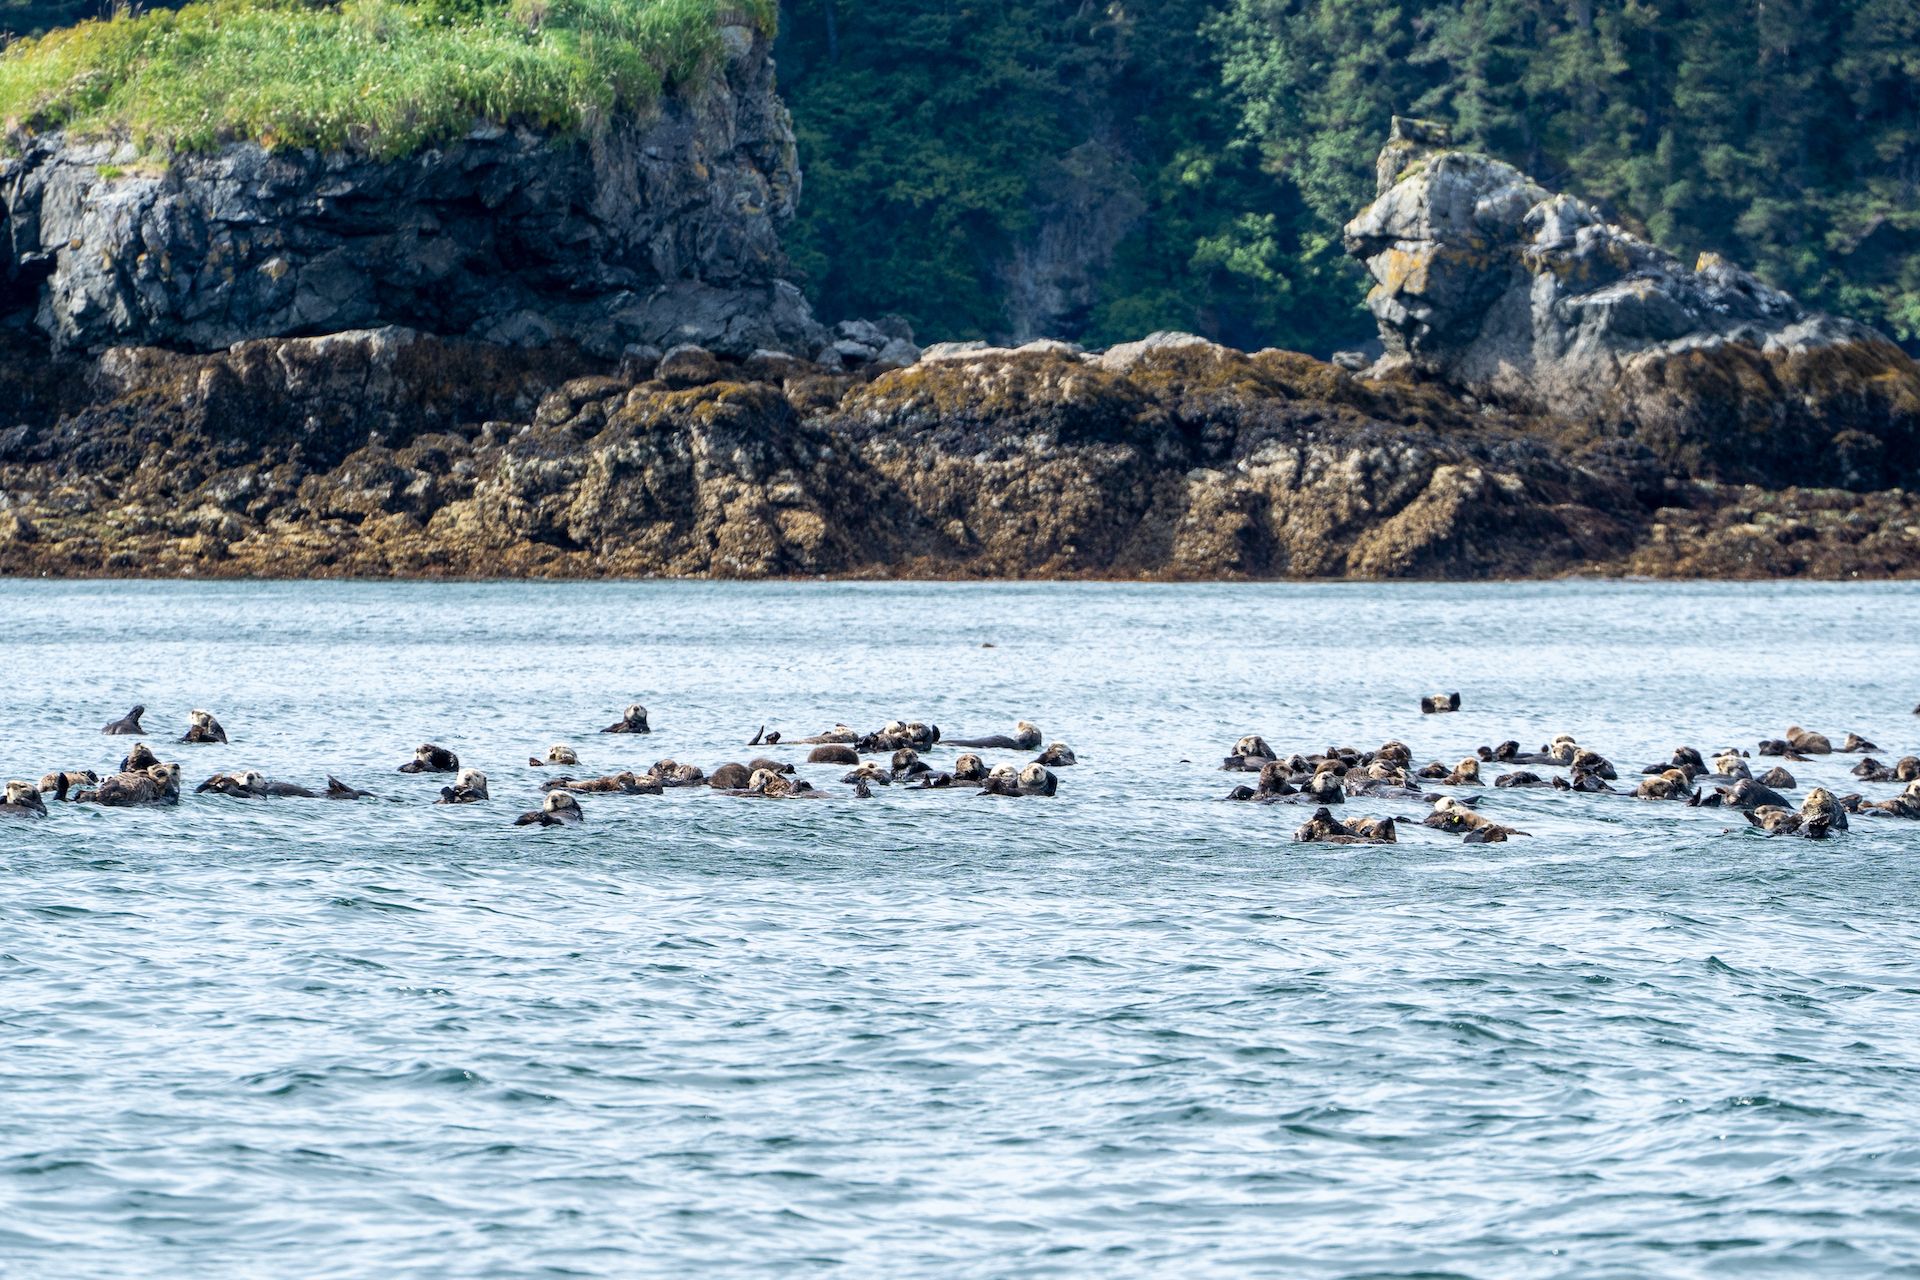 A raft of 50 or so otters also floated into our view. Sea otters do look cute and innocent… but don’t be deceived by their appearance.